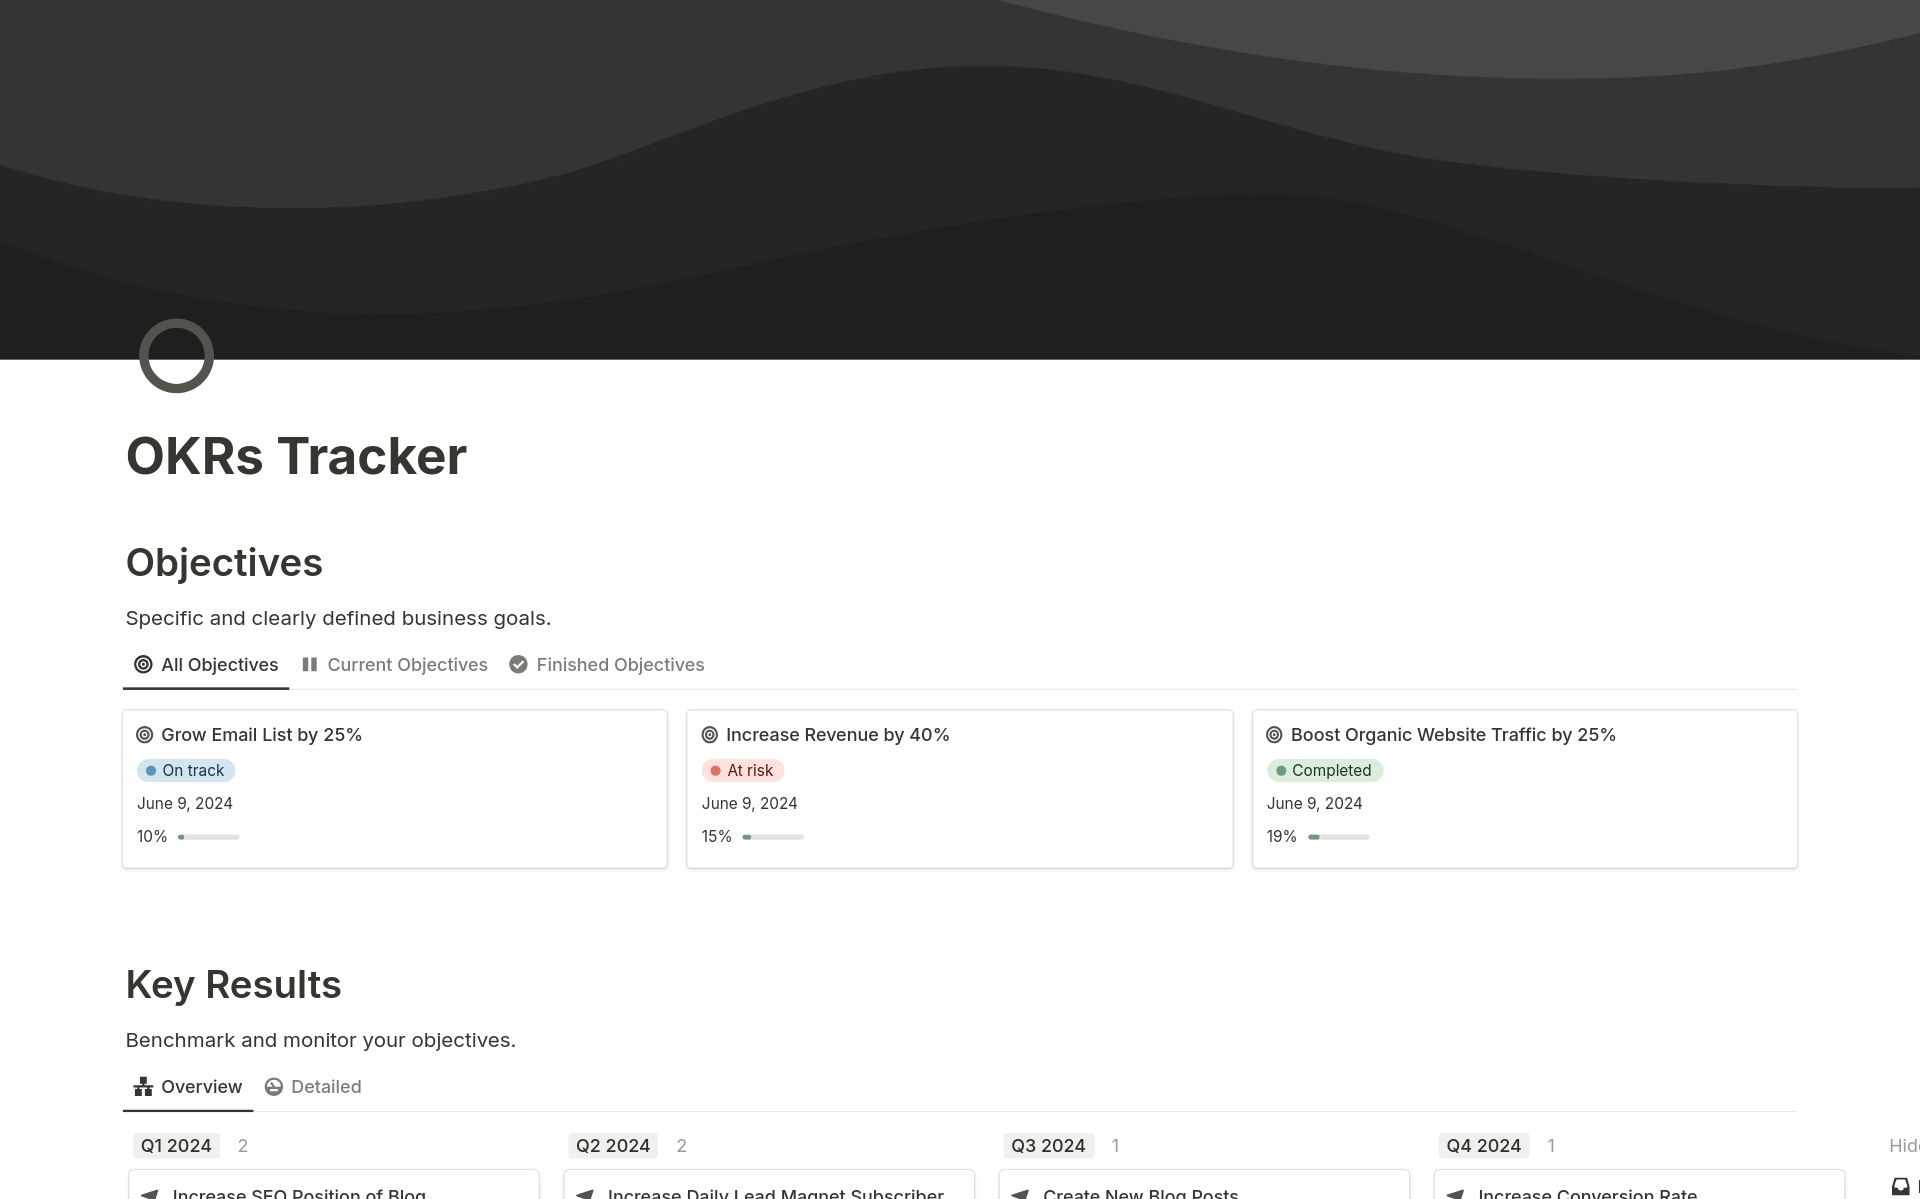 Achieve your objectives with this OKR-Tracker template! Effectively manage your Objectives and Key Results by setting clear, measurable goals and tracking progress in one place.